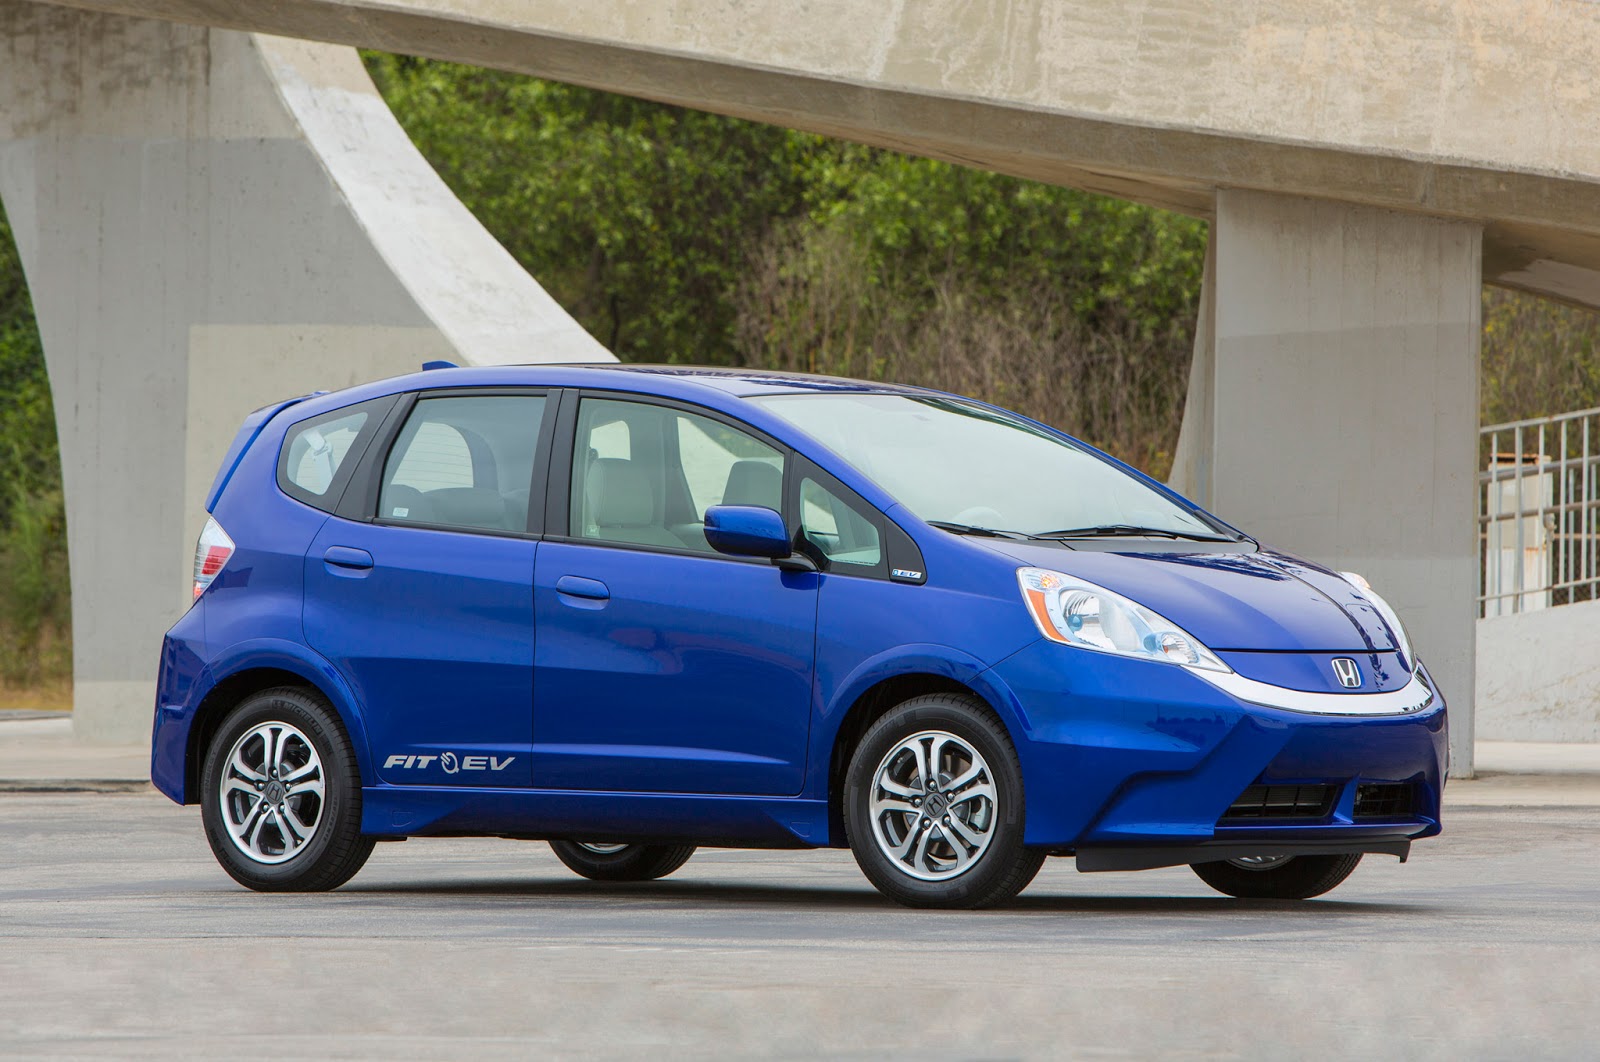 New Auto and Cars: Honda Fit model value in used car market